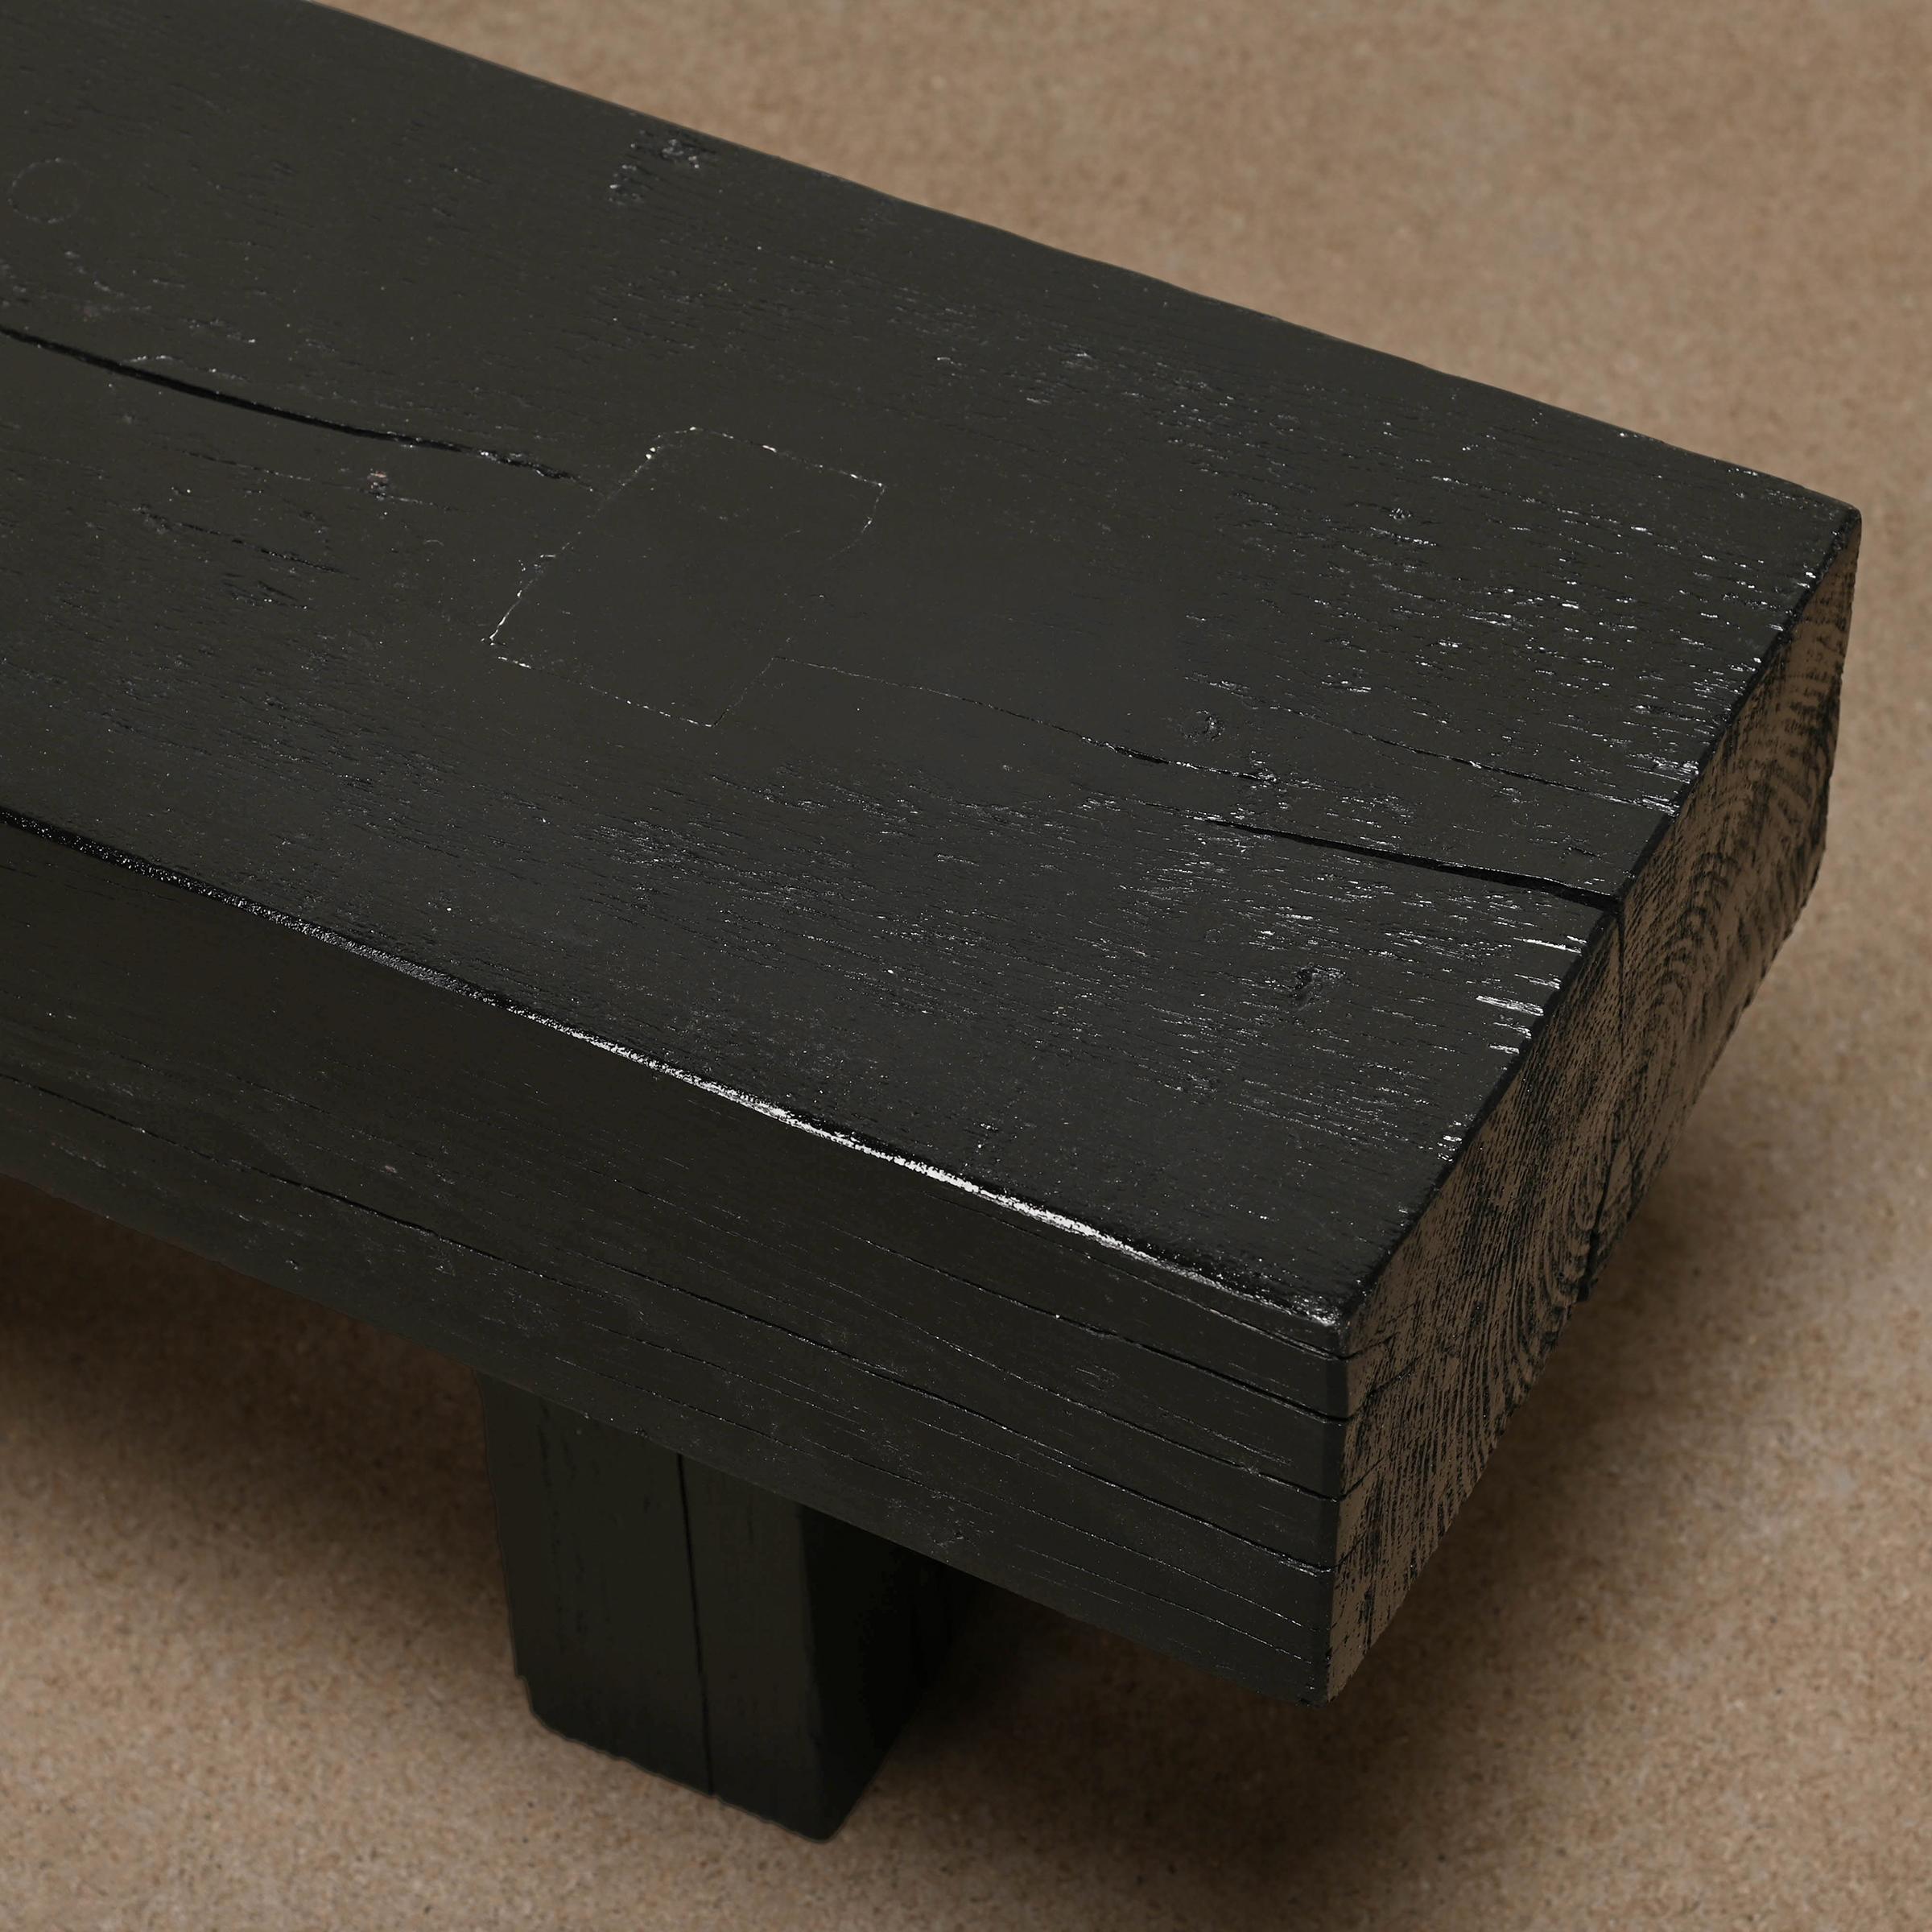 Decorative and Graphical Bench or Side Table in Black Stained Solid Pine Wood For Sale 5